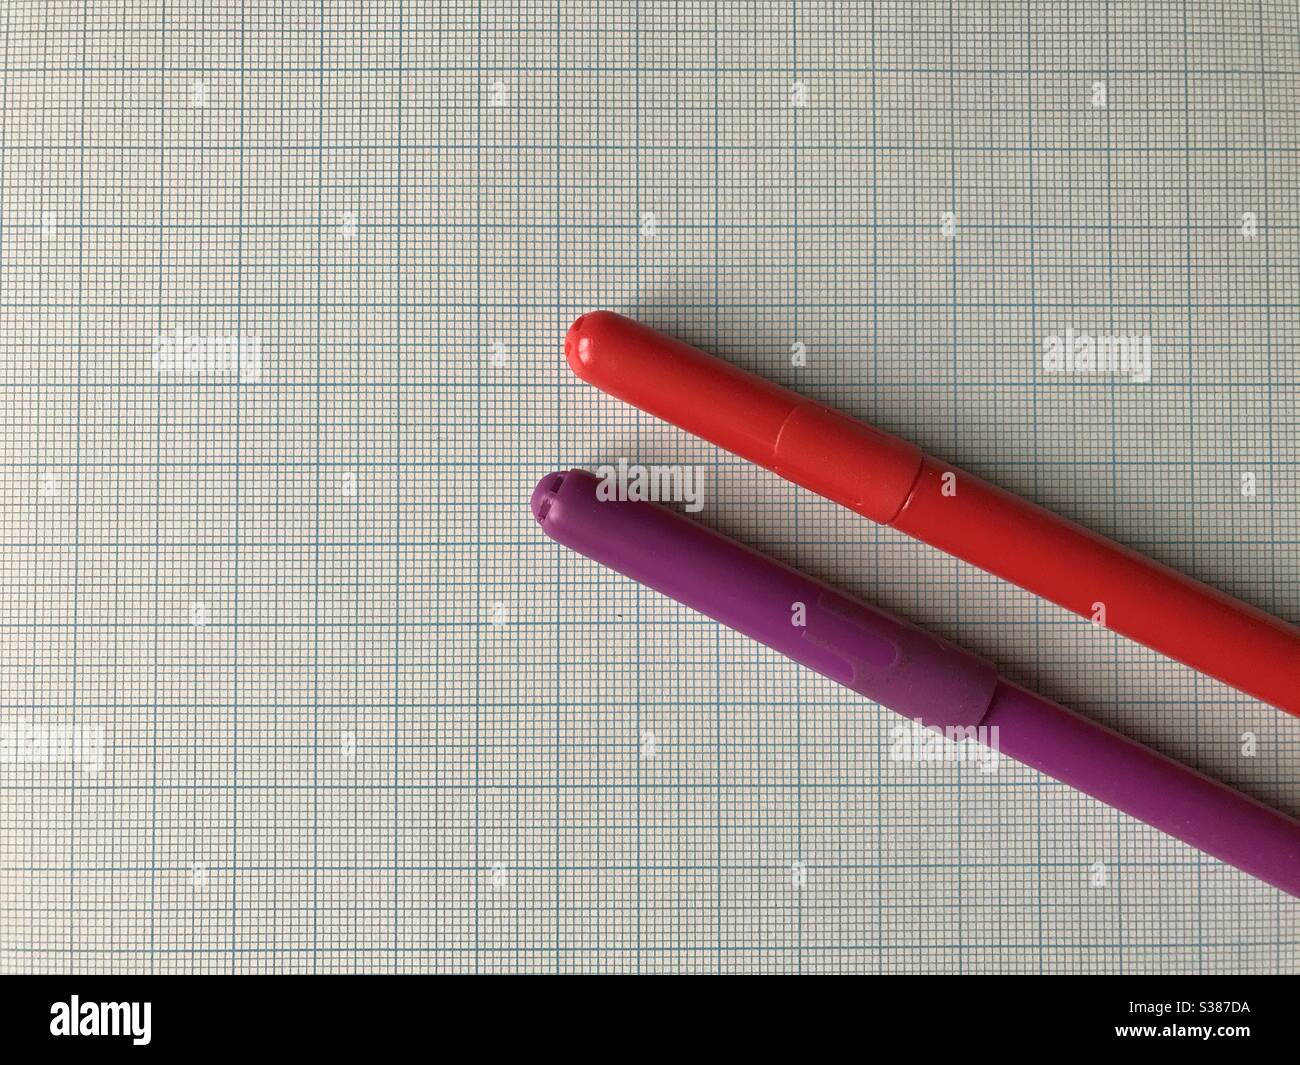 Two Coloured Pencils on a Graph Paper Stock Photo